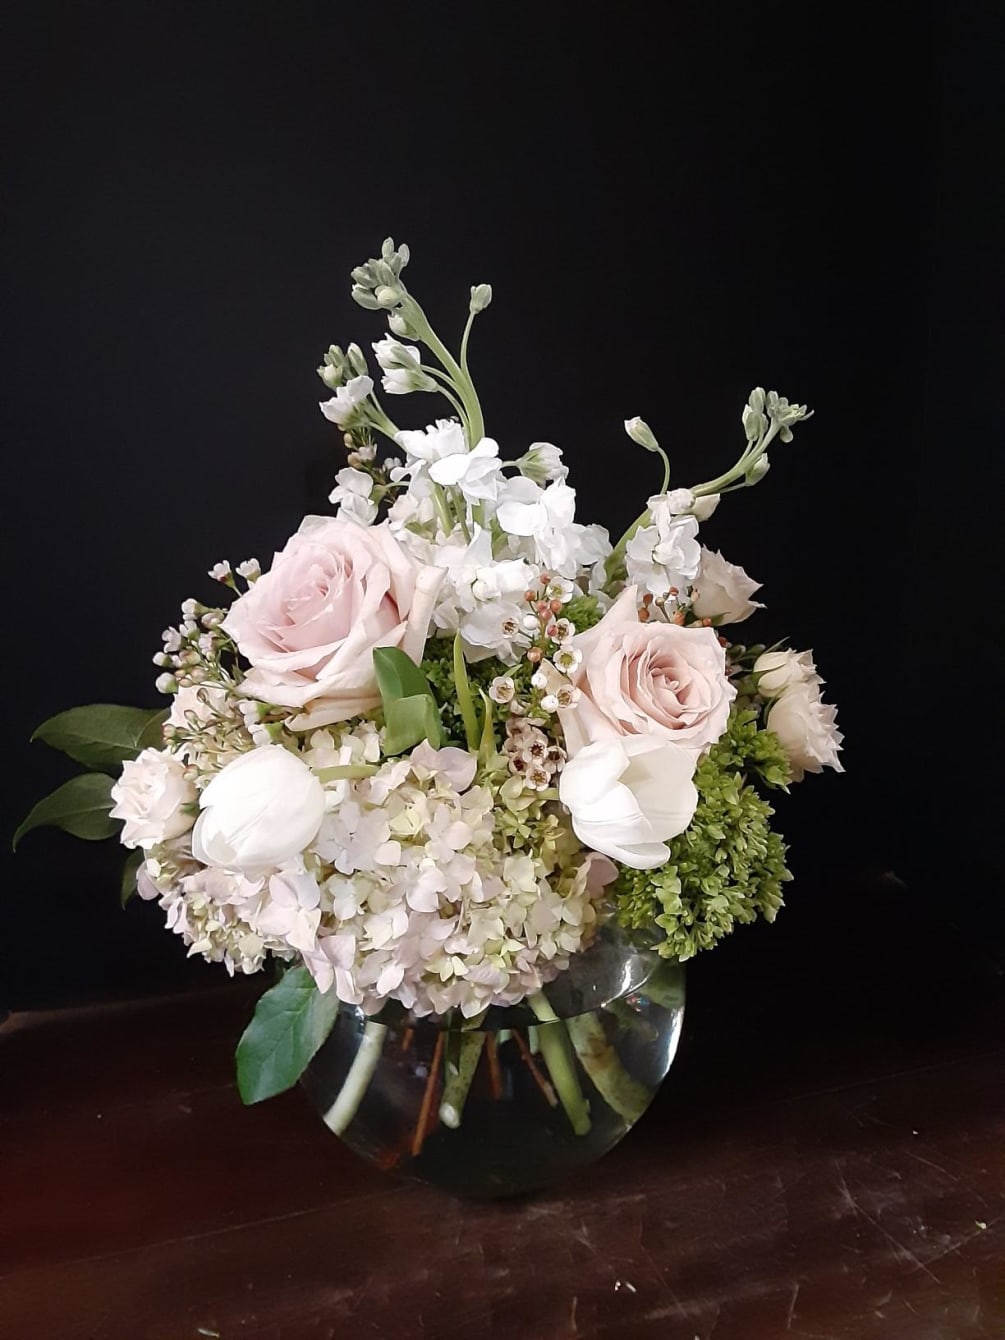 The name of this arrangement is inspired by the &quot;bubble&quot; shaped container